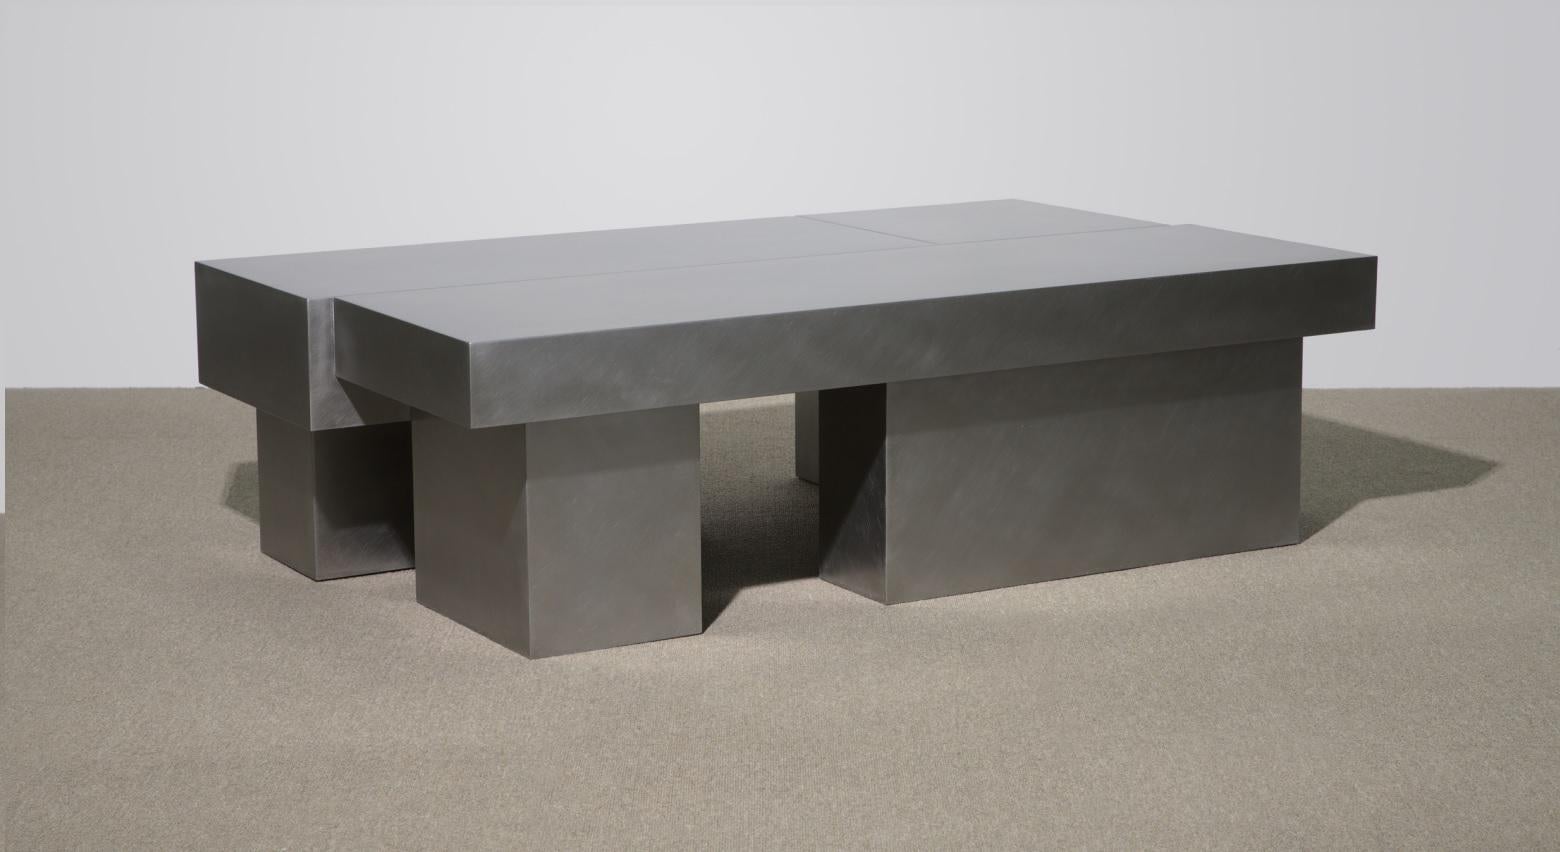 Small Layered steel coffee table I by Hyungshin Hwang
Dimensions: D 120 x W 72 x H 36 cm
Materials: stainless steel

Layered Series is the main theme and concept of work of Hwang, who continues his experiment which is based on architectural